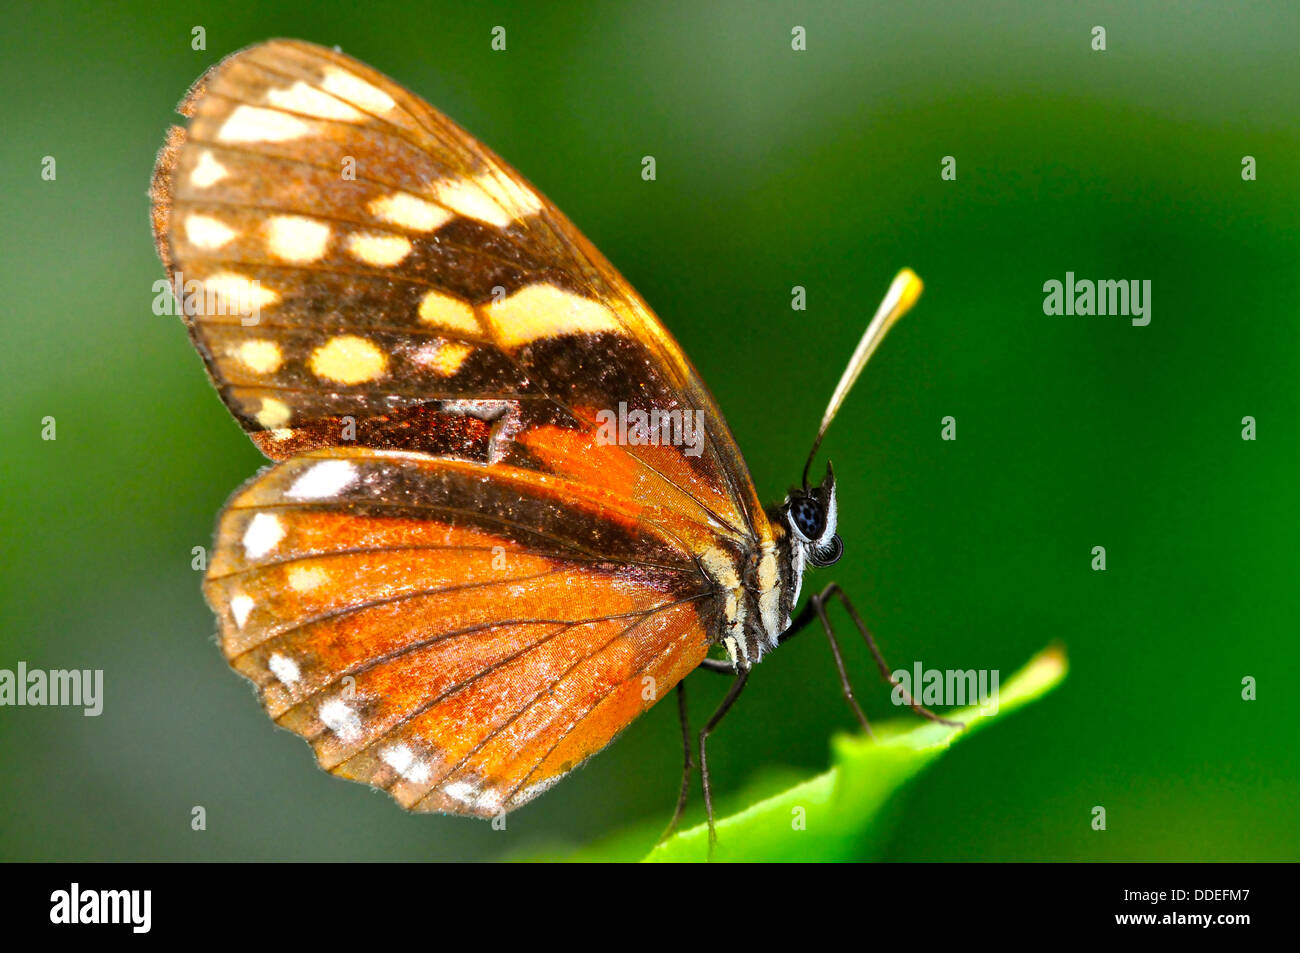 Beautiful Tiger Mimic Butterfly on a leaf Stock Photo